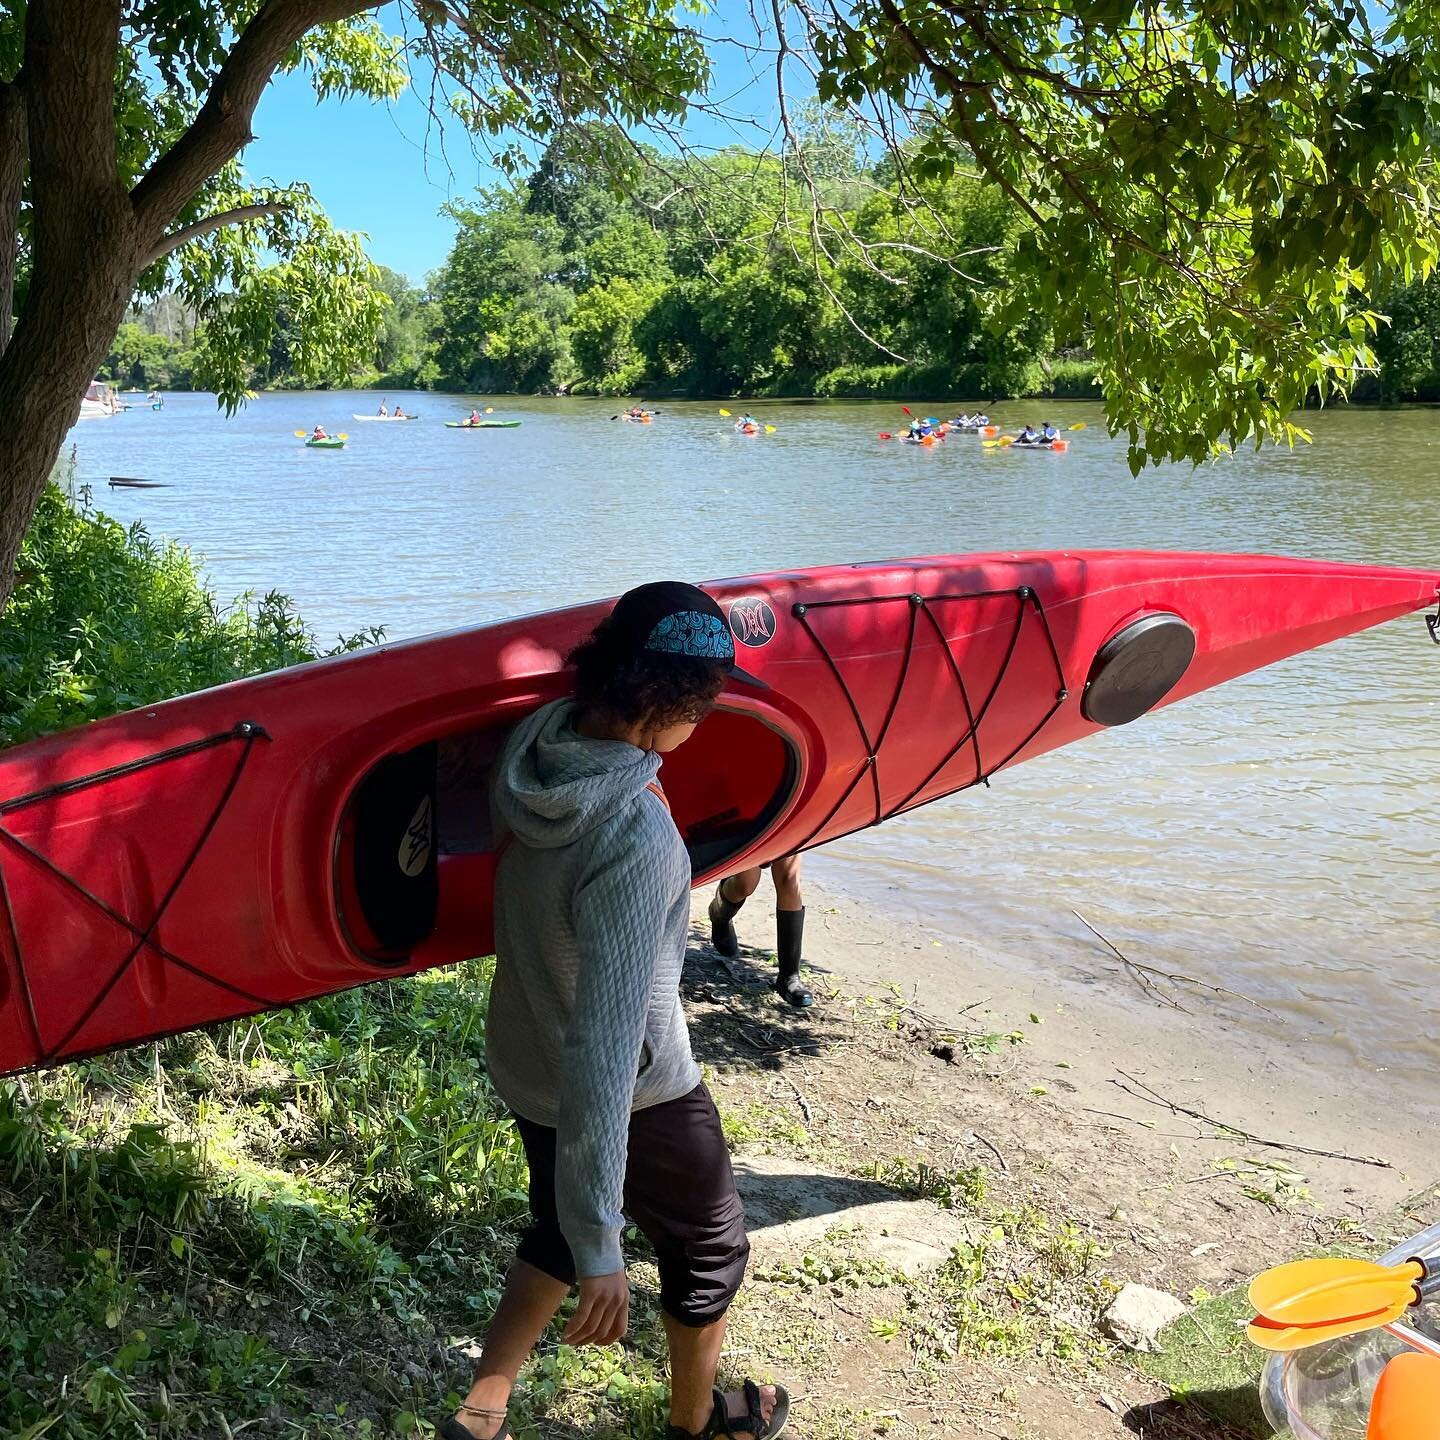 🛶let&rsquo;s make this the BIGGEST turnout yet! ENROLMENT IS OPEN. 

🛶JUNE 10th is our 4th annual #Paddle4Plastics along the Humber River. Enrolment link in bio, SLIDING SCALE TICKET OPTIONS AVAILABLE! 

🛶What&rsquo;s involved: 
* Paddle the Humbe